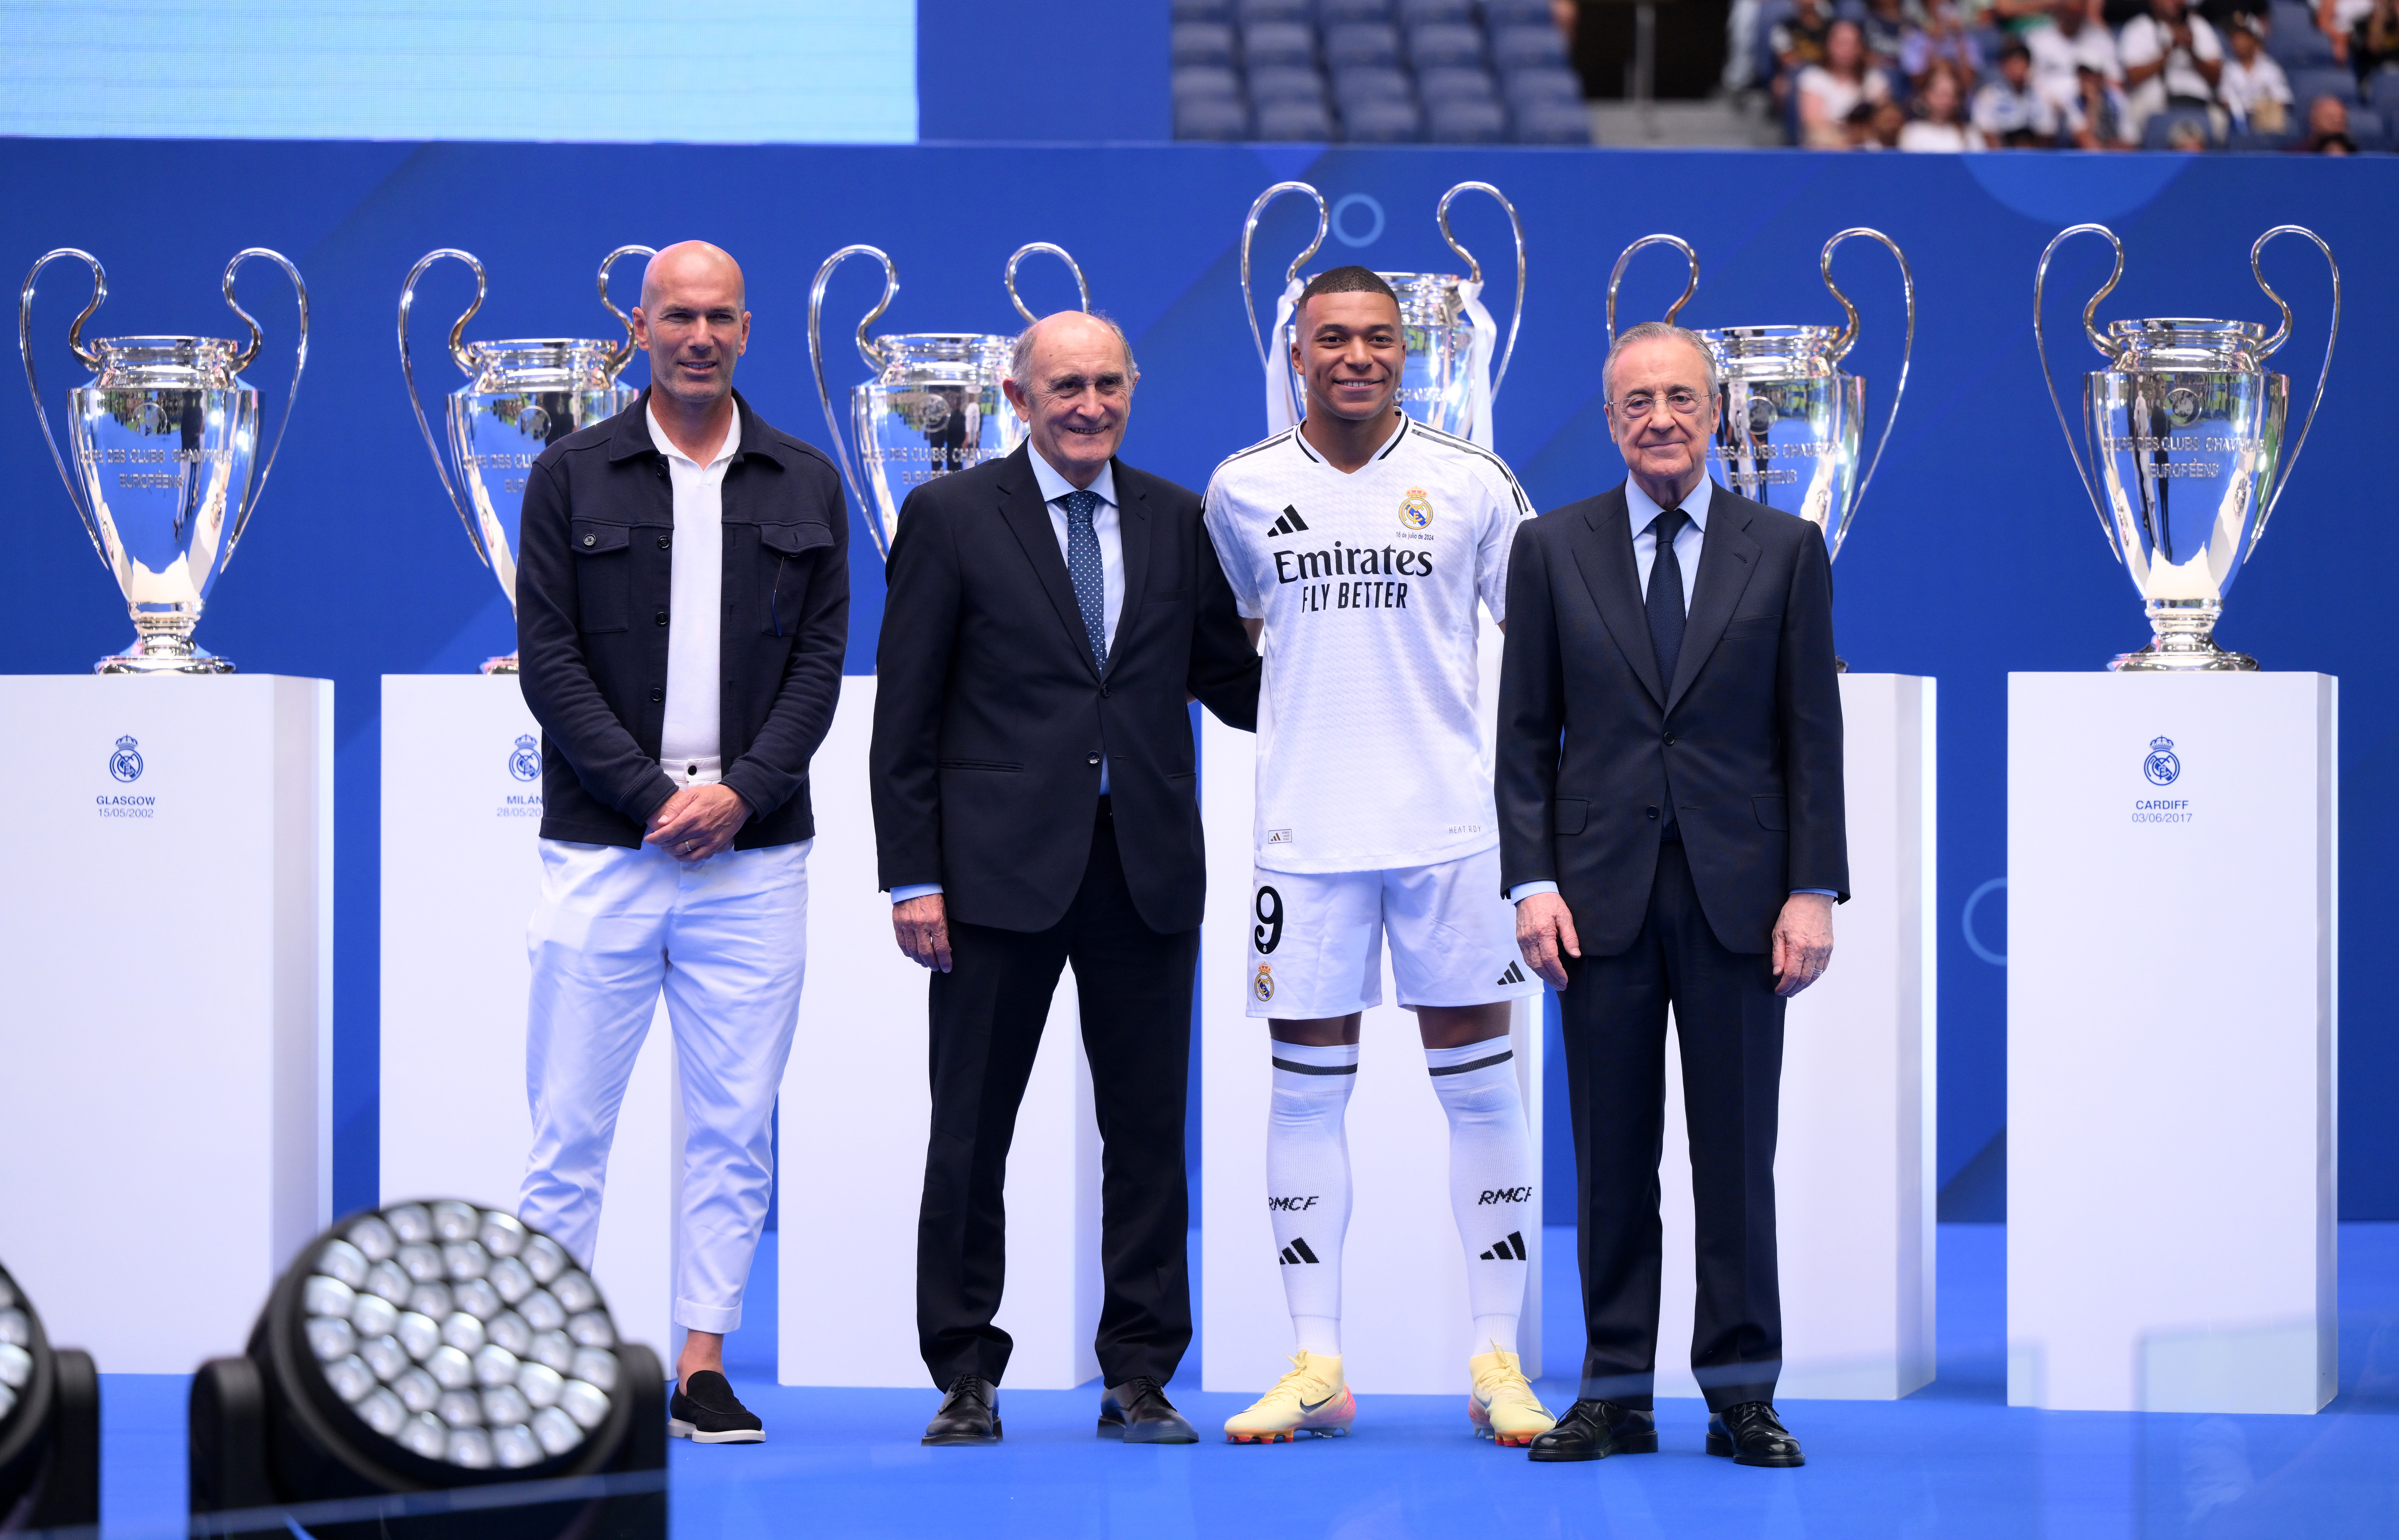 MADRID, SPAIN - JULY 16: Real Madrid new signing, Kylian Mbappe (2R) poses for a photo with former Real Madrid player and coach, Zinedine Zidane (L), former Real Madrid player, Pirri (2L) and President of Real Madrid, Florentino Perez Rodriguez (R) as he is unveiled at Estadio Santiago Bernabeu on July 16, 2024 in Madrid, Spain. (Photo by David Ramos/Getty Images)